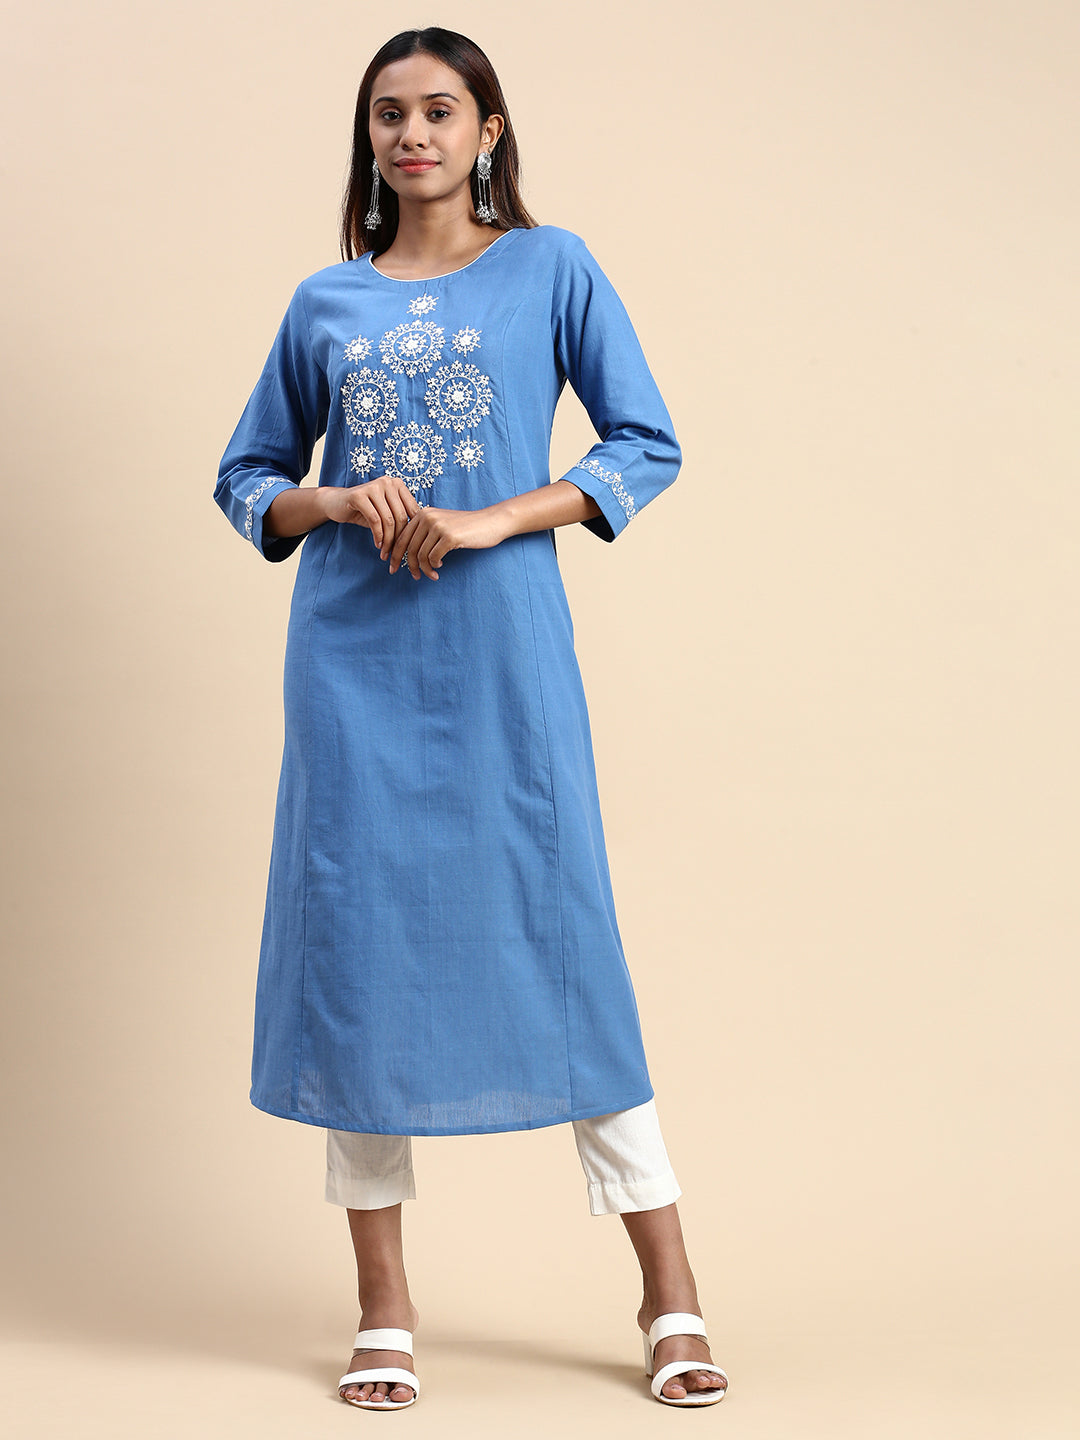 BLUE HILLS BY KINTI HANDLOOM NEW PRINCESS CUT FRONT BUTTONS READYMADE  SUMMER SPECIAL LATEST GIRLISH FANCY KURTIS WITH SIDE POCKET BEST RATE  ONLINE IN INDIA MALAYSIA UK - Reewaz International | Wholesaler